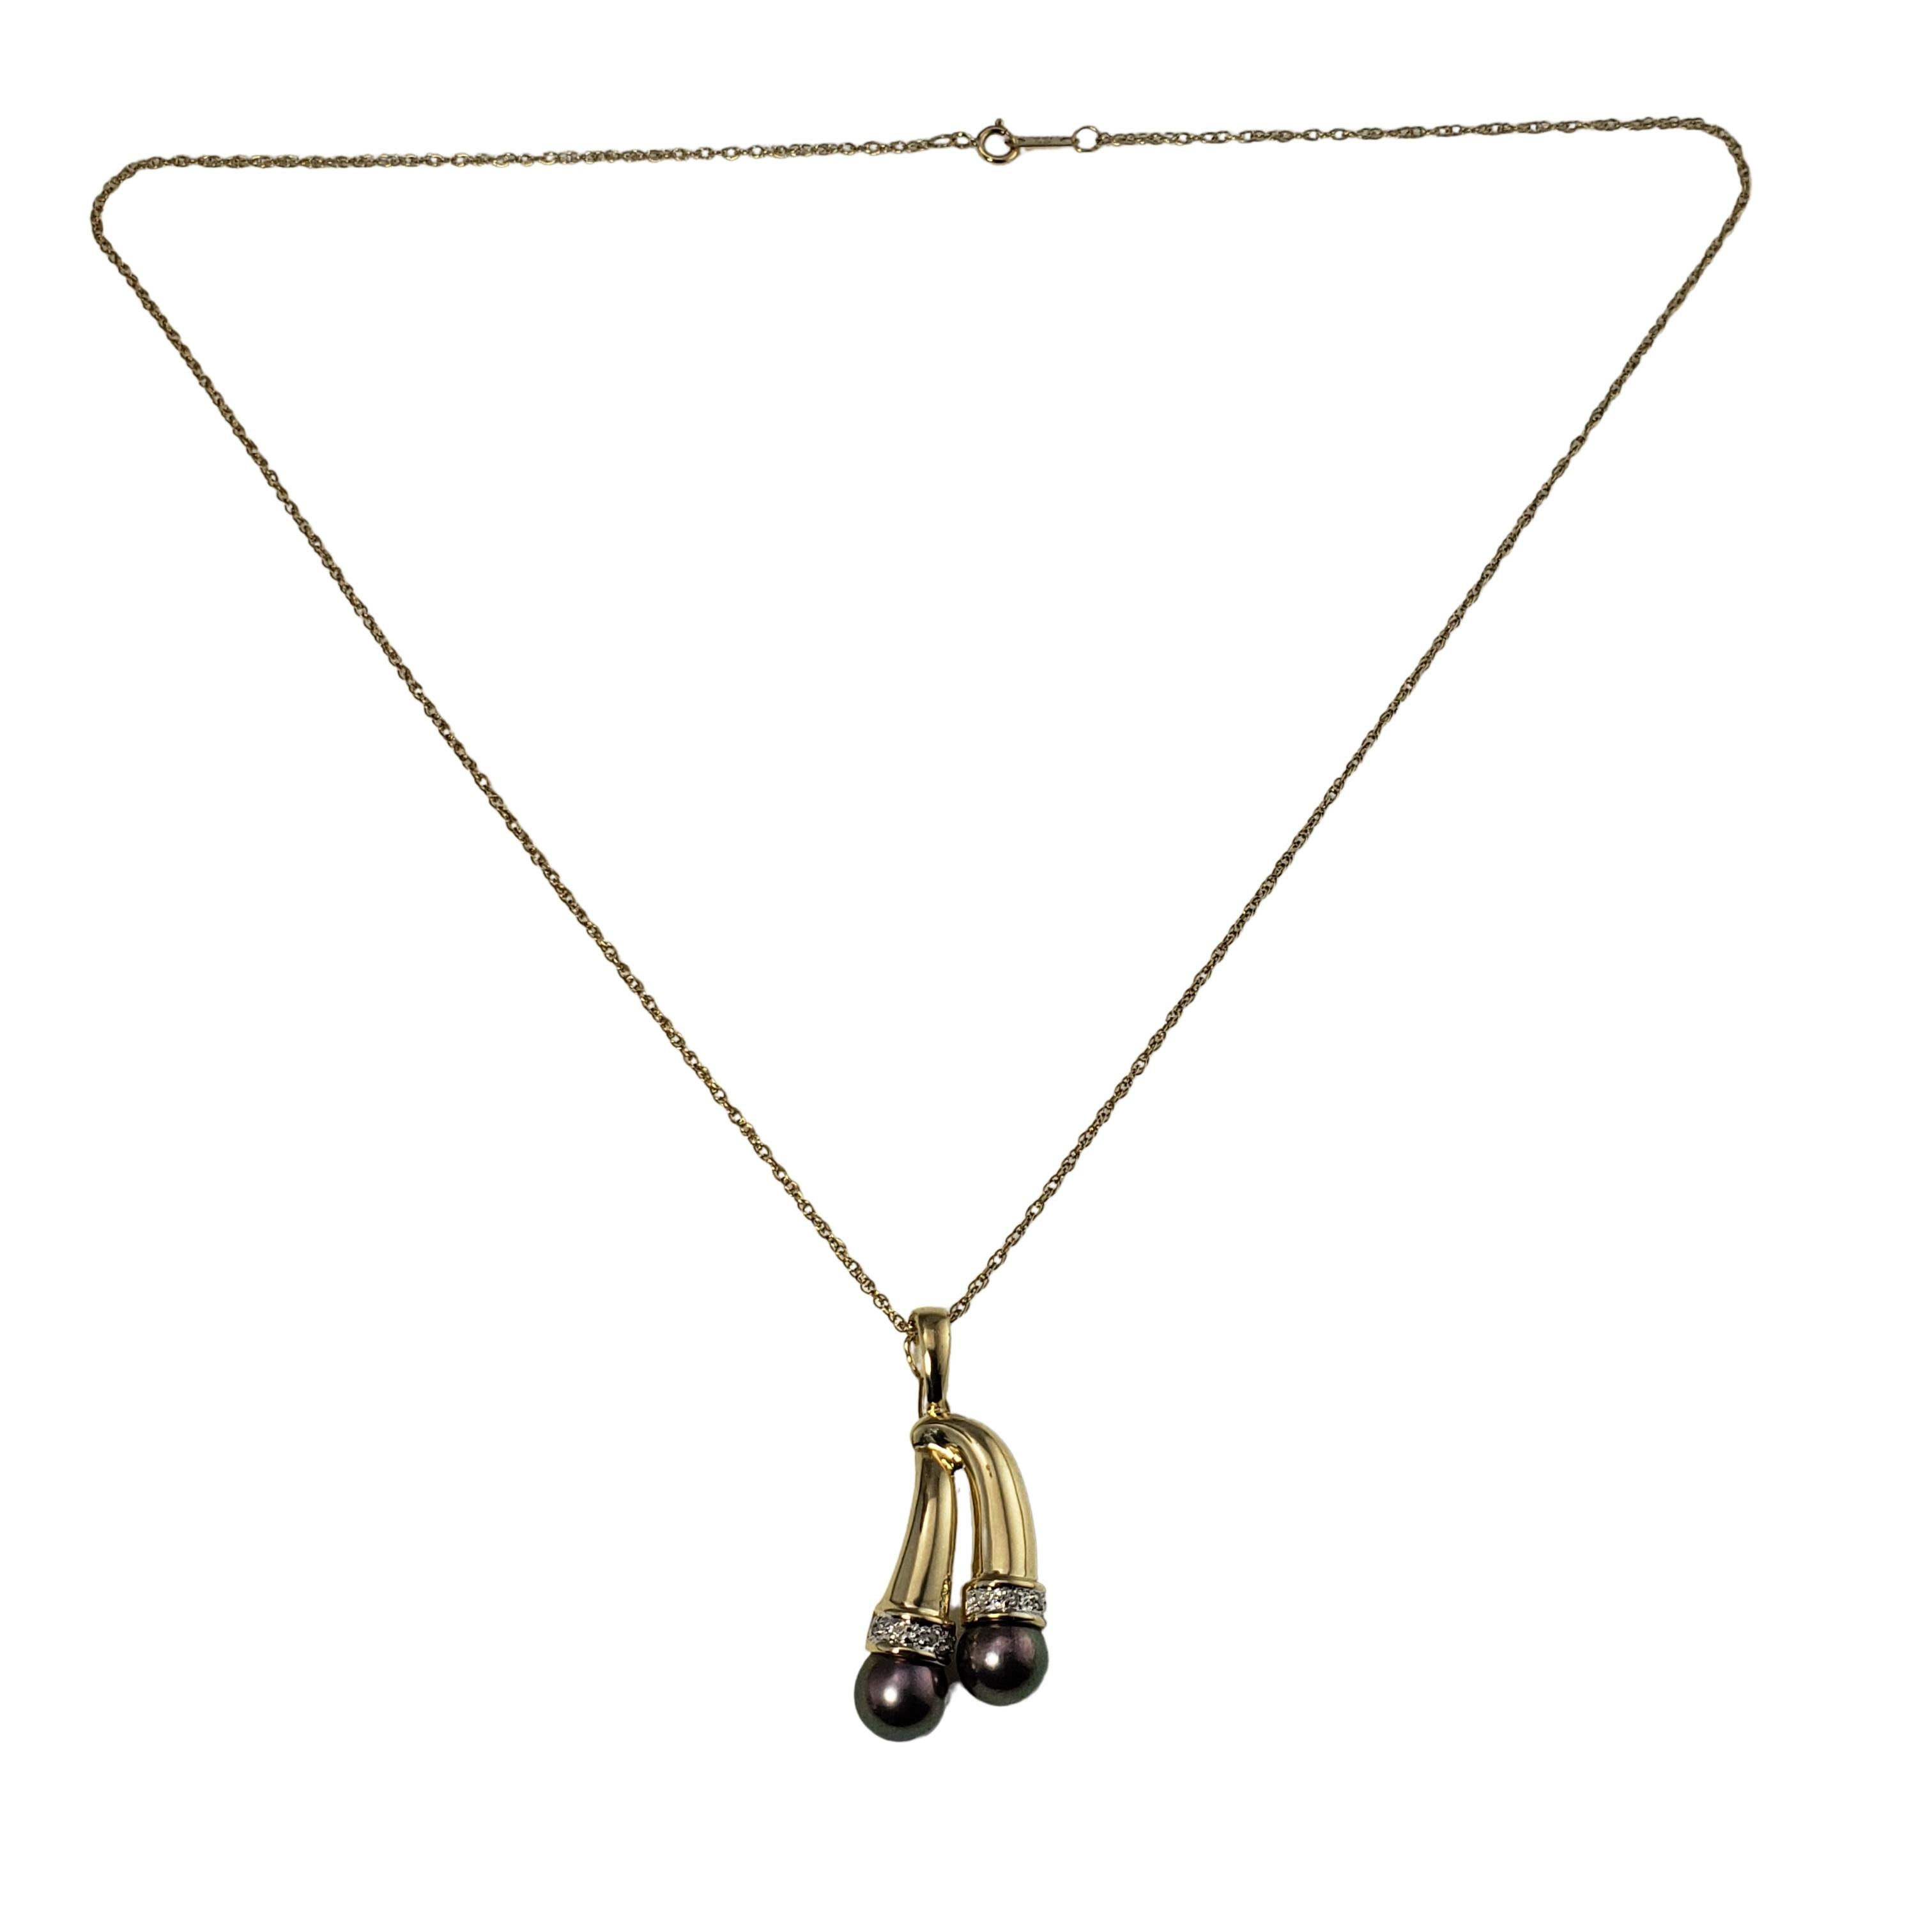 Vintage 14 Karat Yellow Gold Black Pearl and Diamond Pendant Necklace-

This lovely pendant features two black pearls (7 mm each) and eight round single cut diamonds set in 14K yellow gold. Suspends from a classic cable chain.

Approximate total